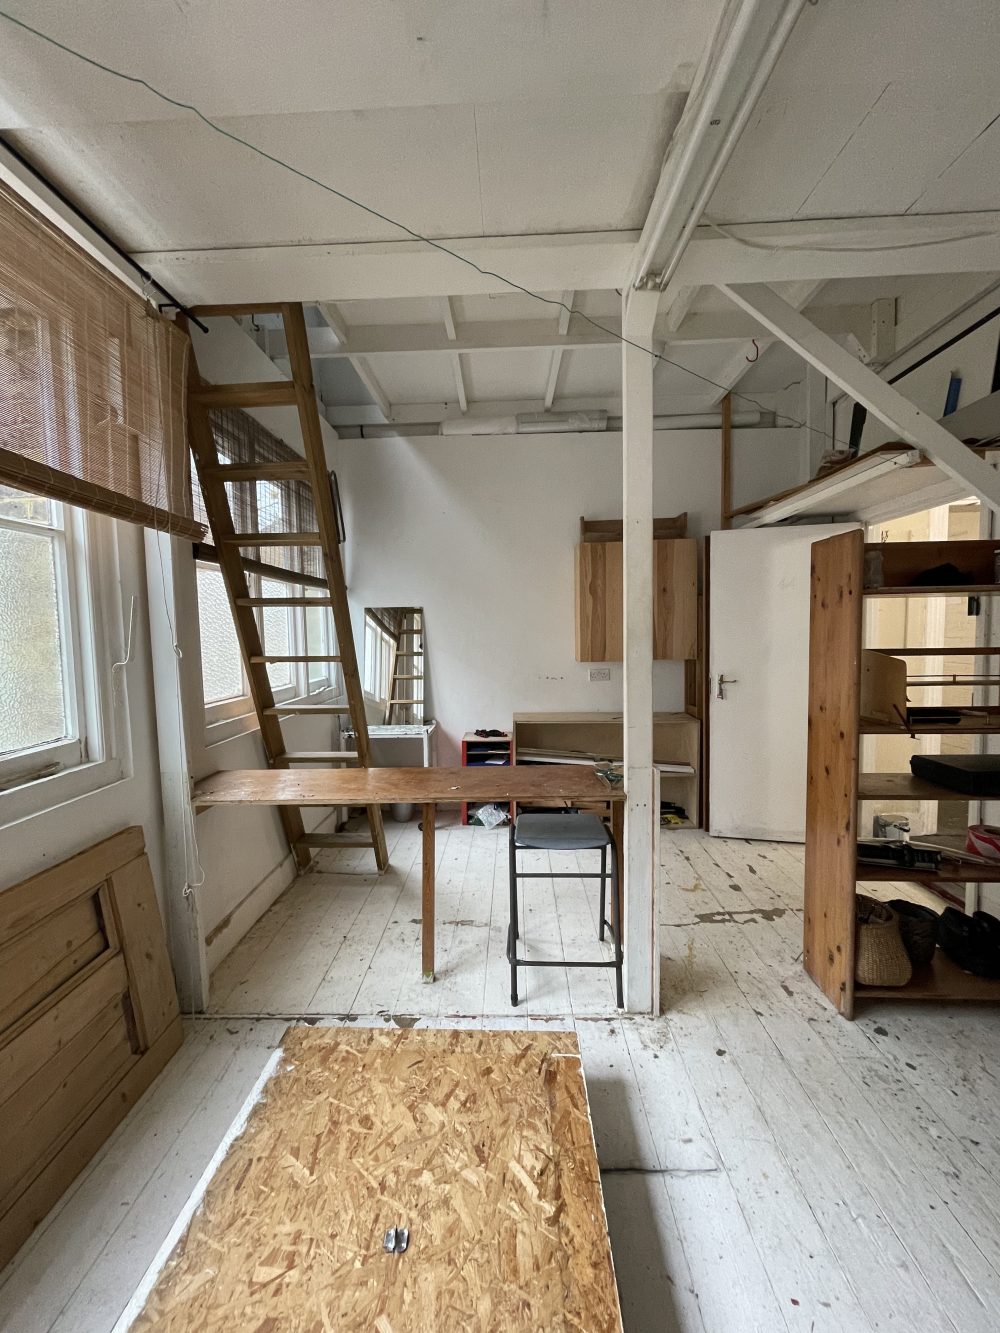 Huge Mezzanine Studio Available to rent in N16 Shelford Place Pic4